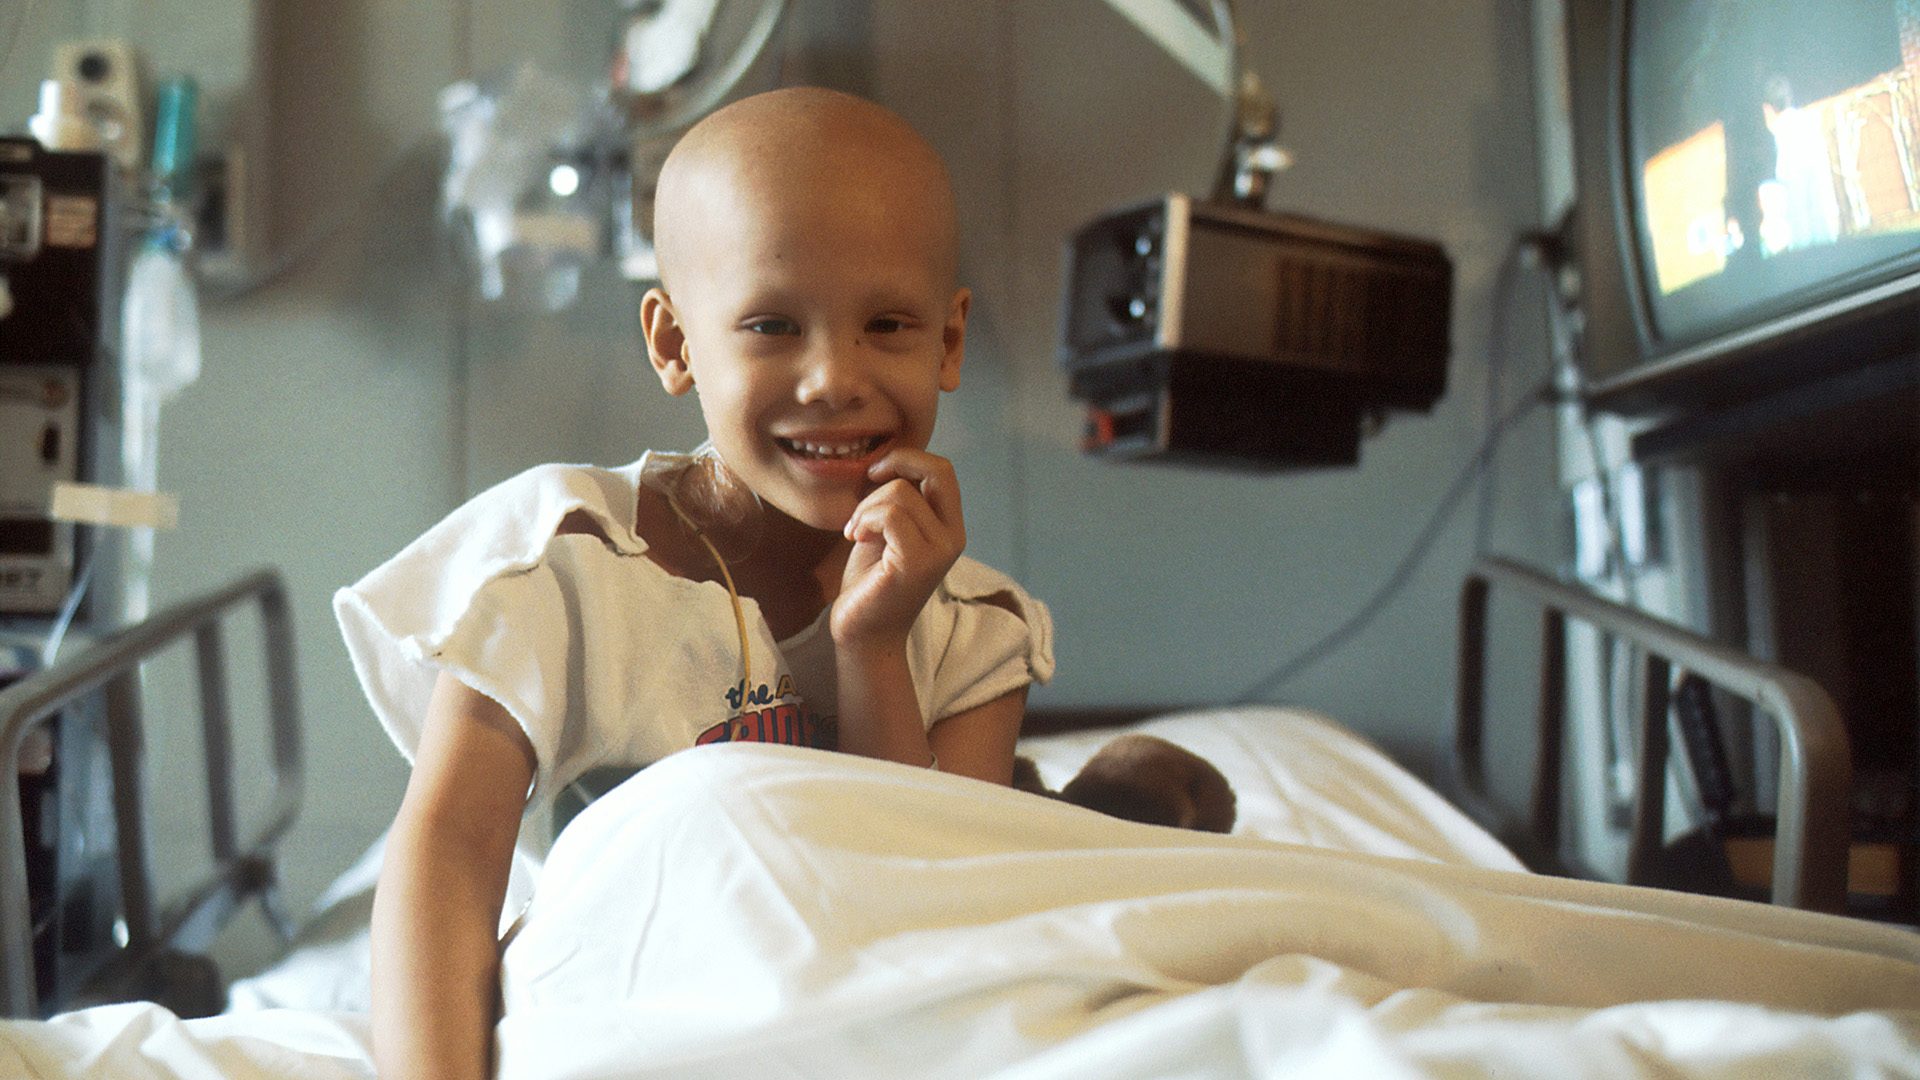 A young girl in a hospital bed receiving cancer treatment